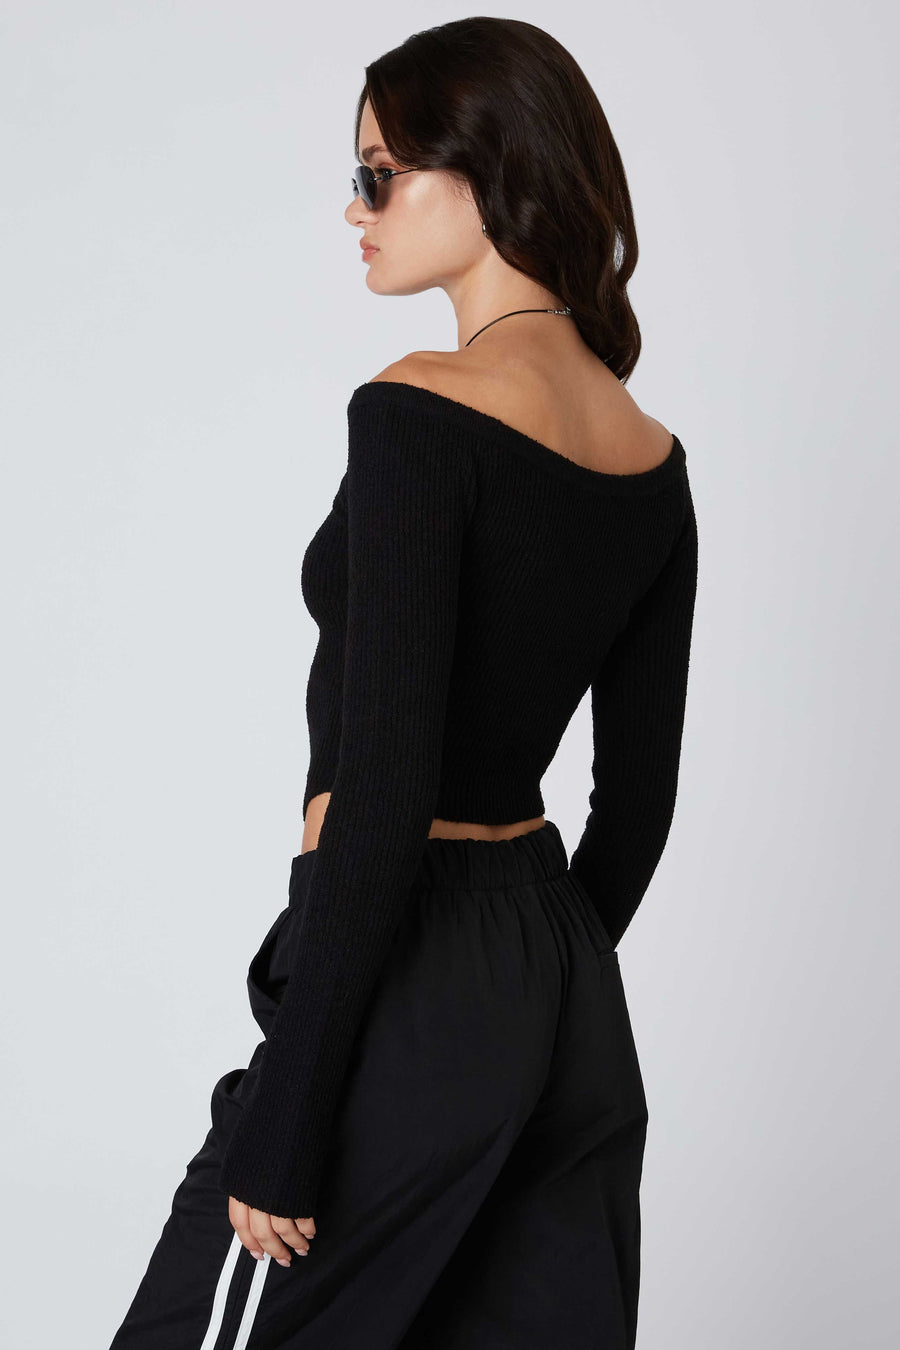 Long sleeve, off-the-shoulder knit sweater.